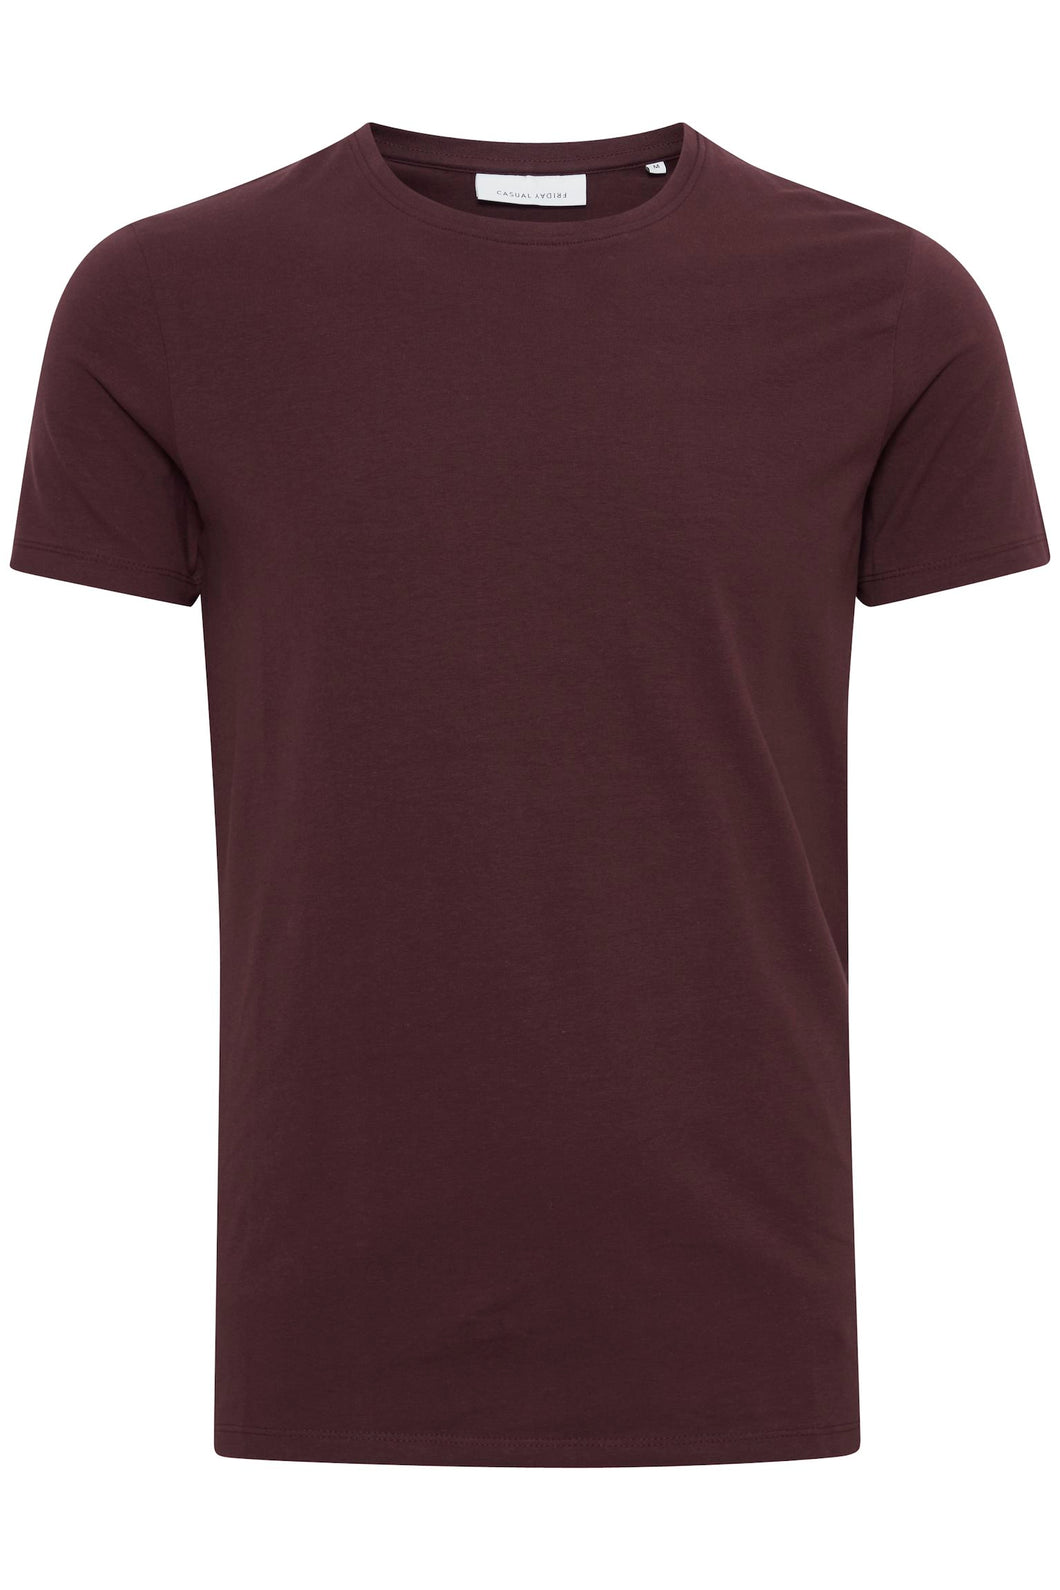 Wine Red T-Shirt - David | Casual Friday